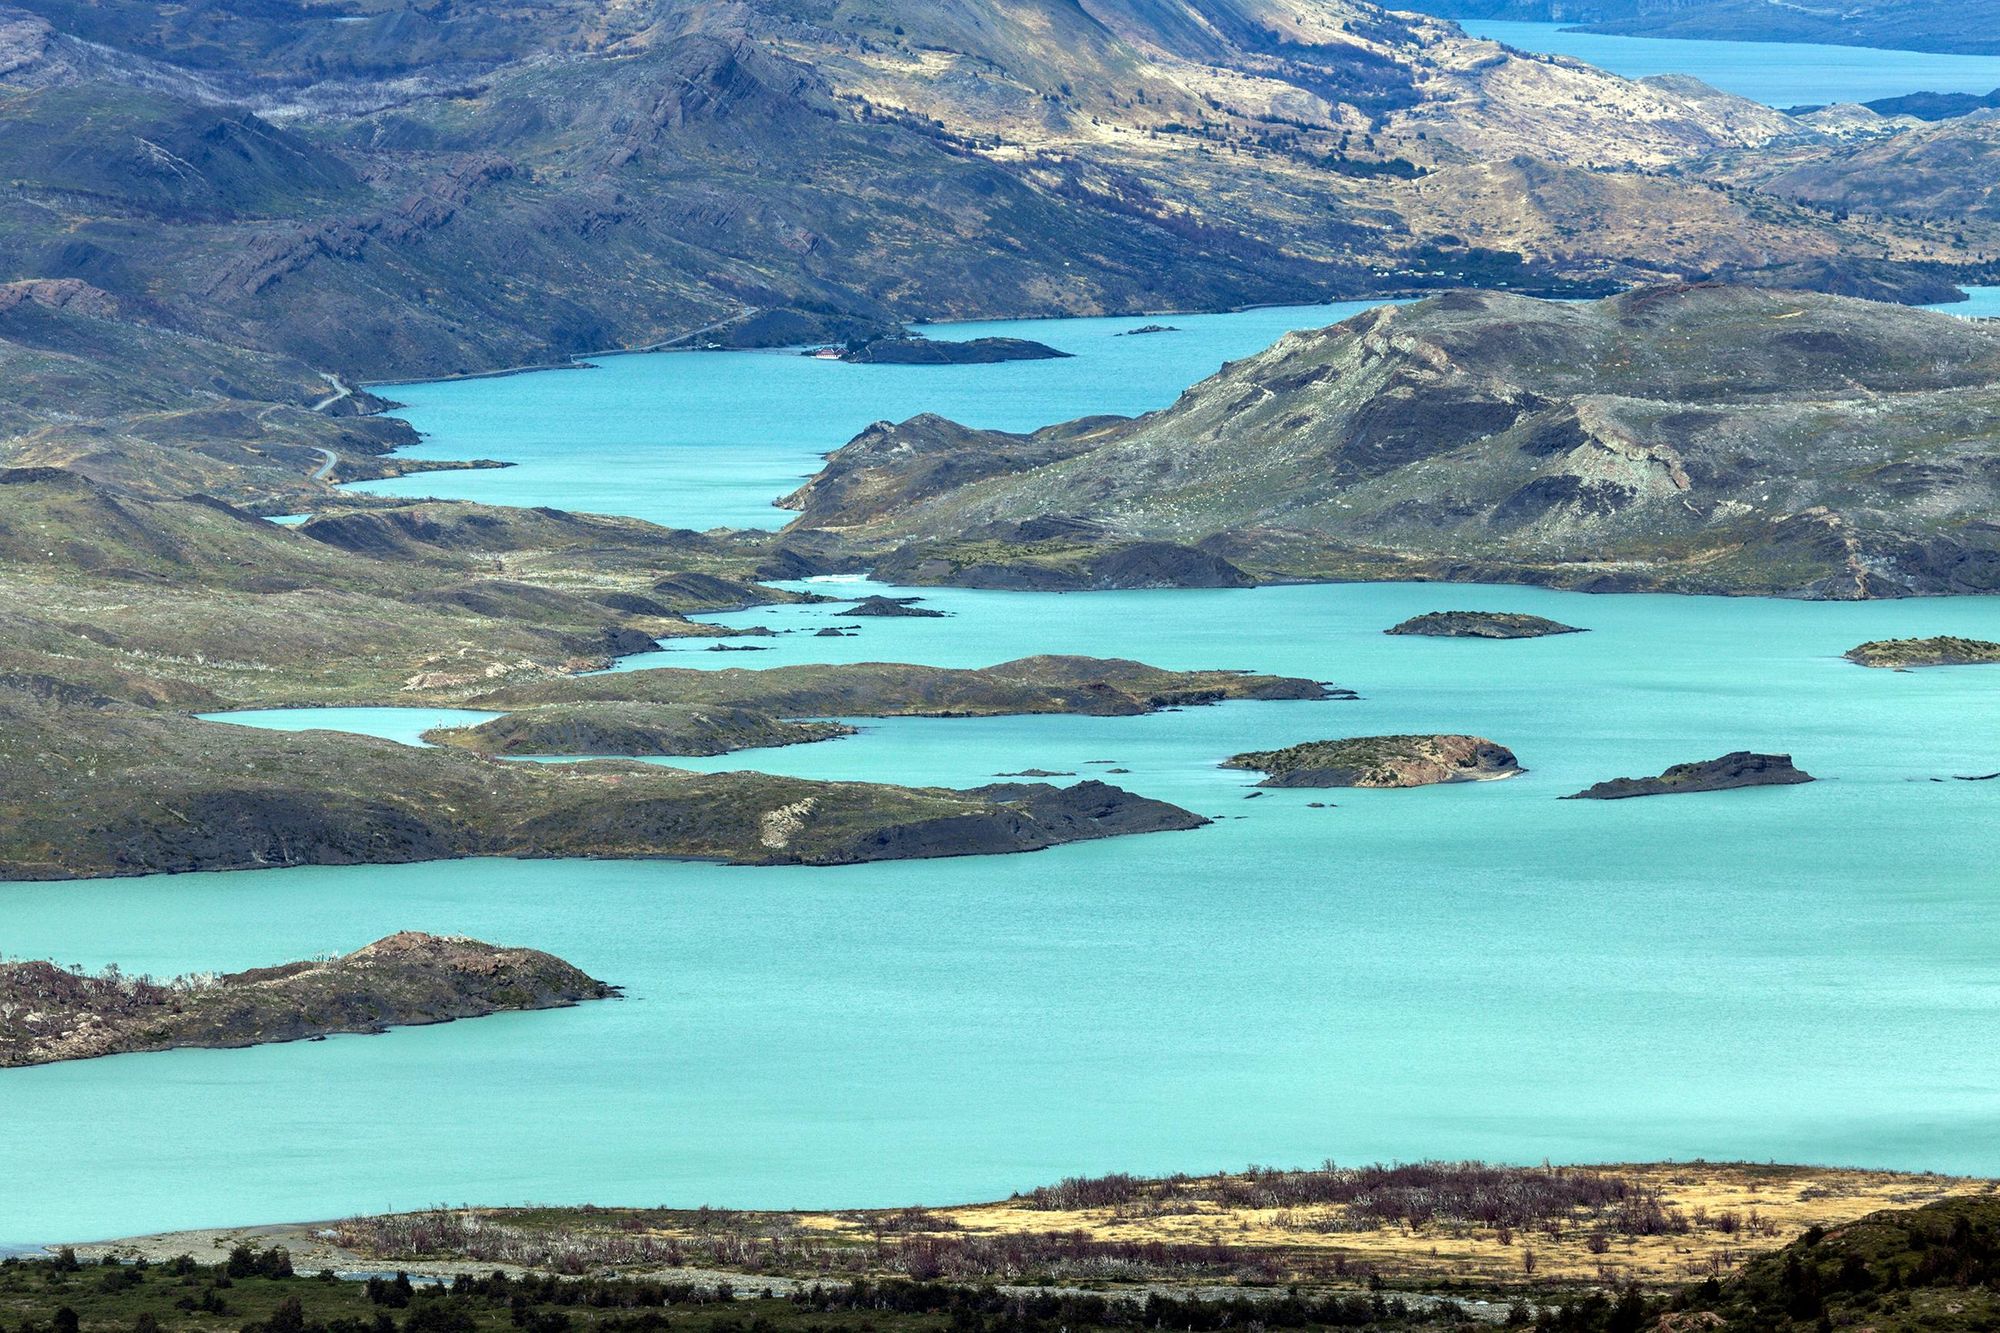 Lake Nordenskjold in Torres del Paine National Park. Photo: Getty